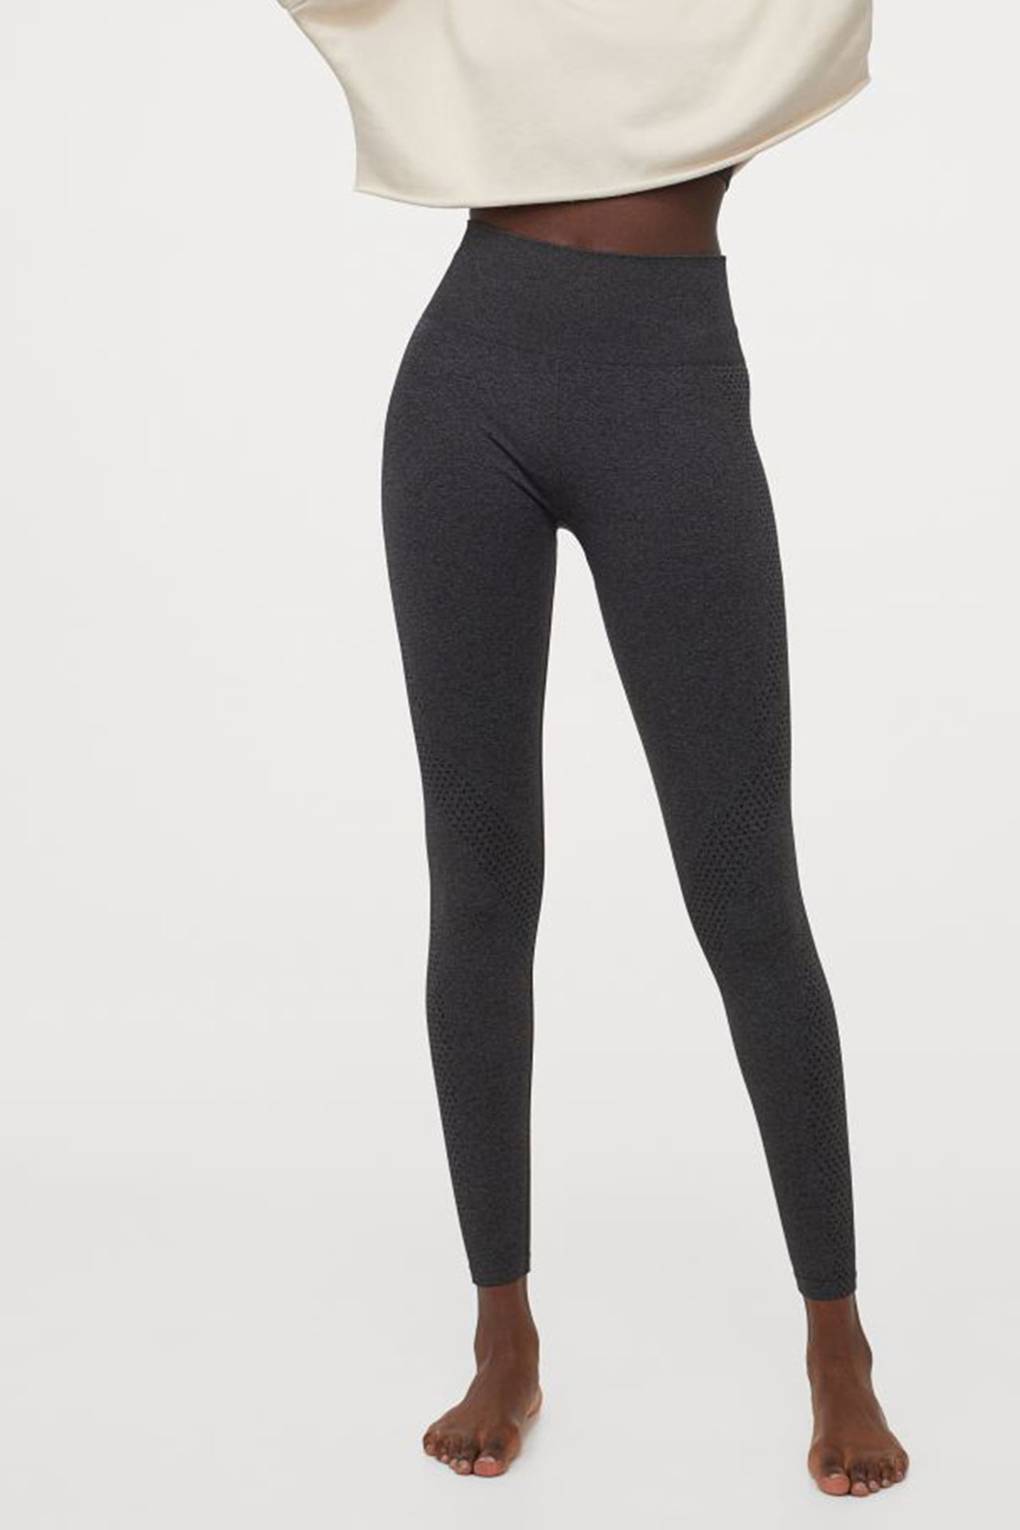 12 Best Squat-Proof Leggings for Your Daily Workout